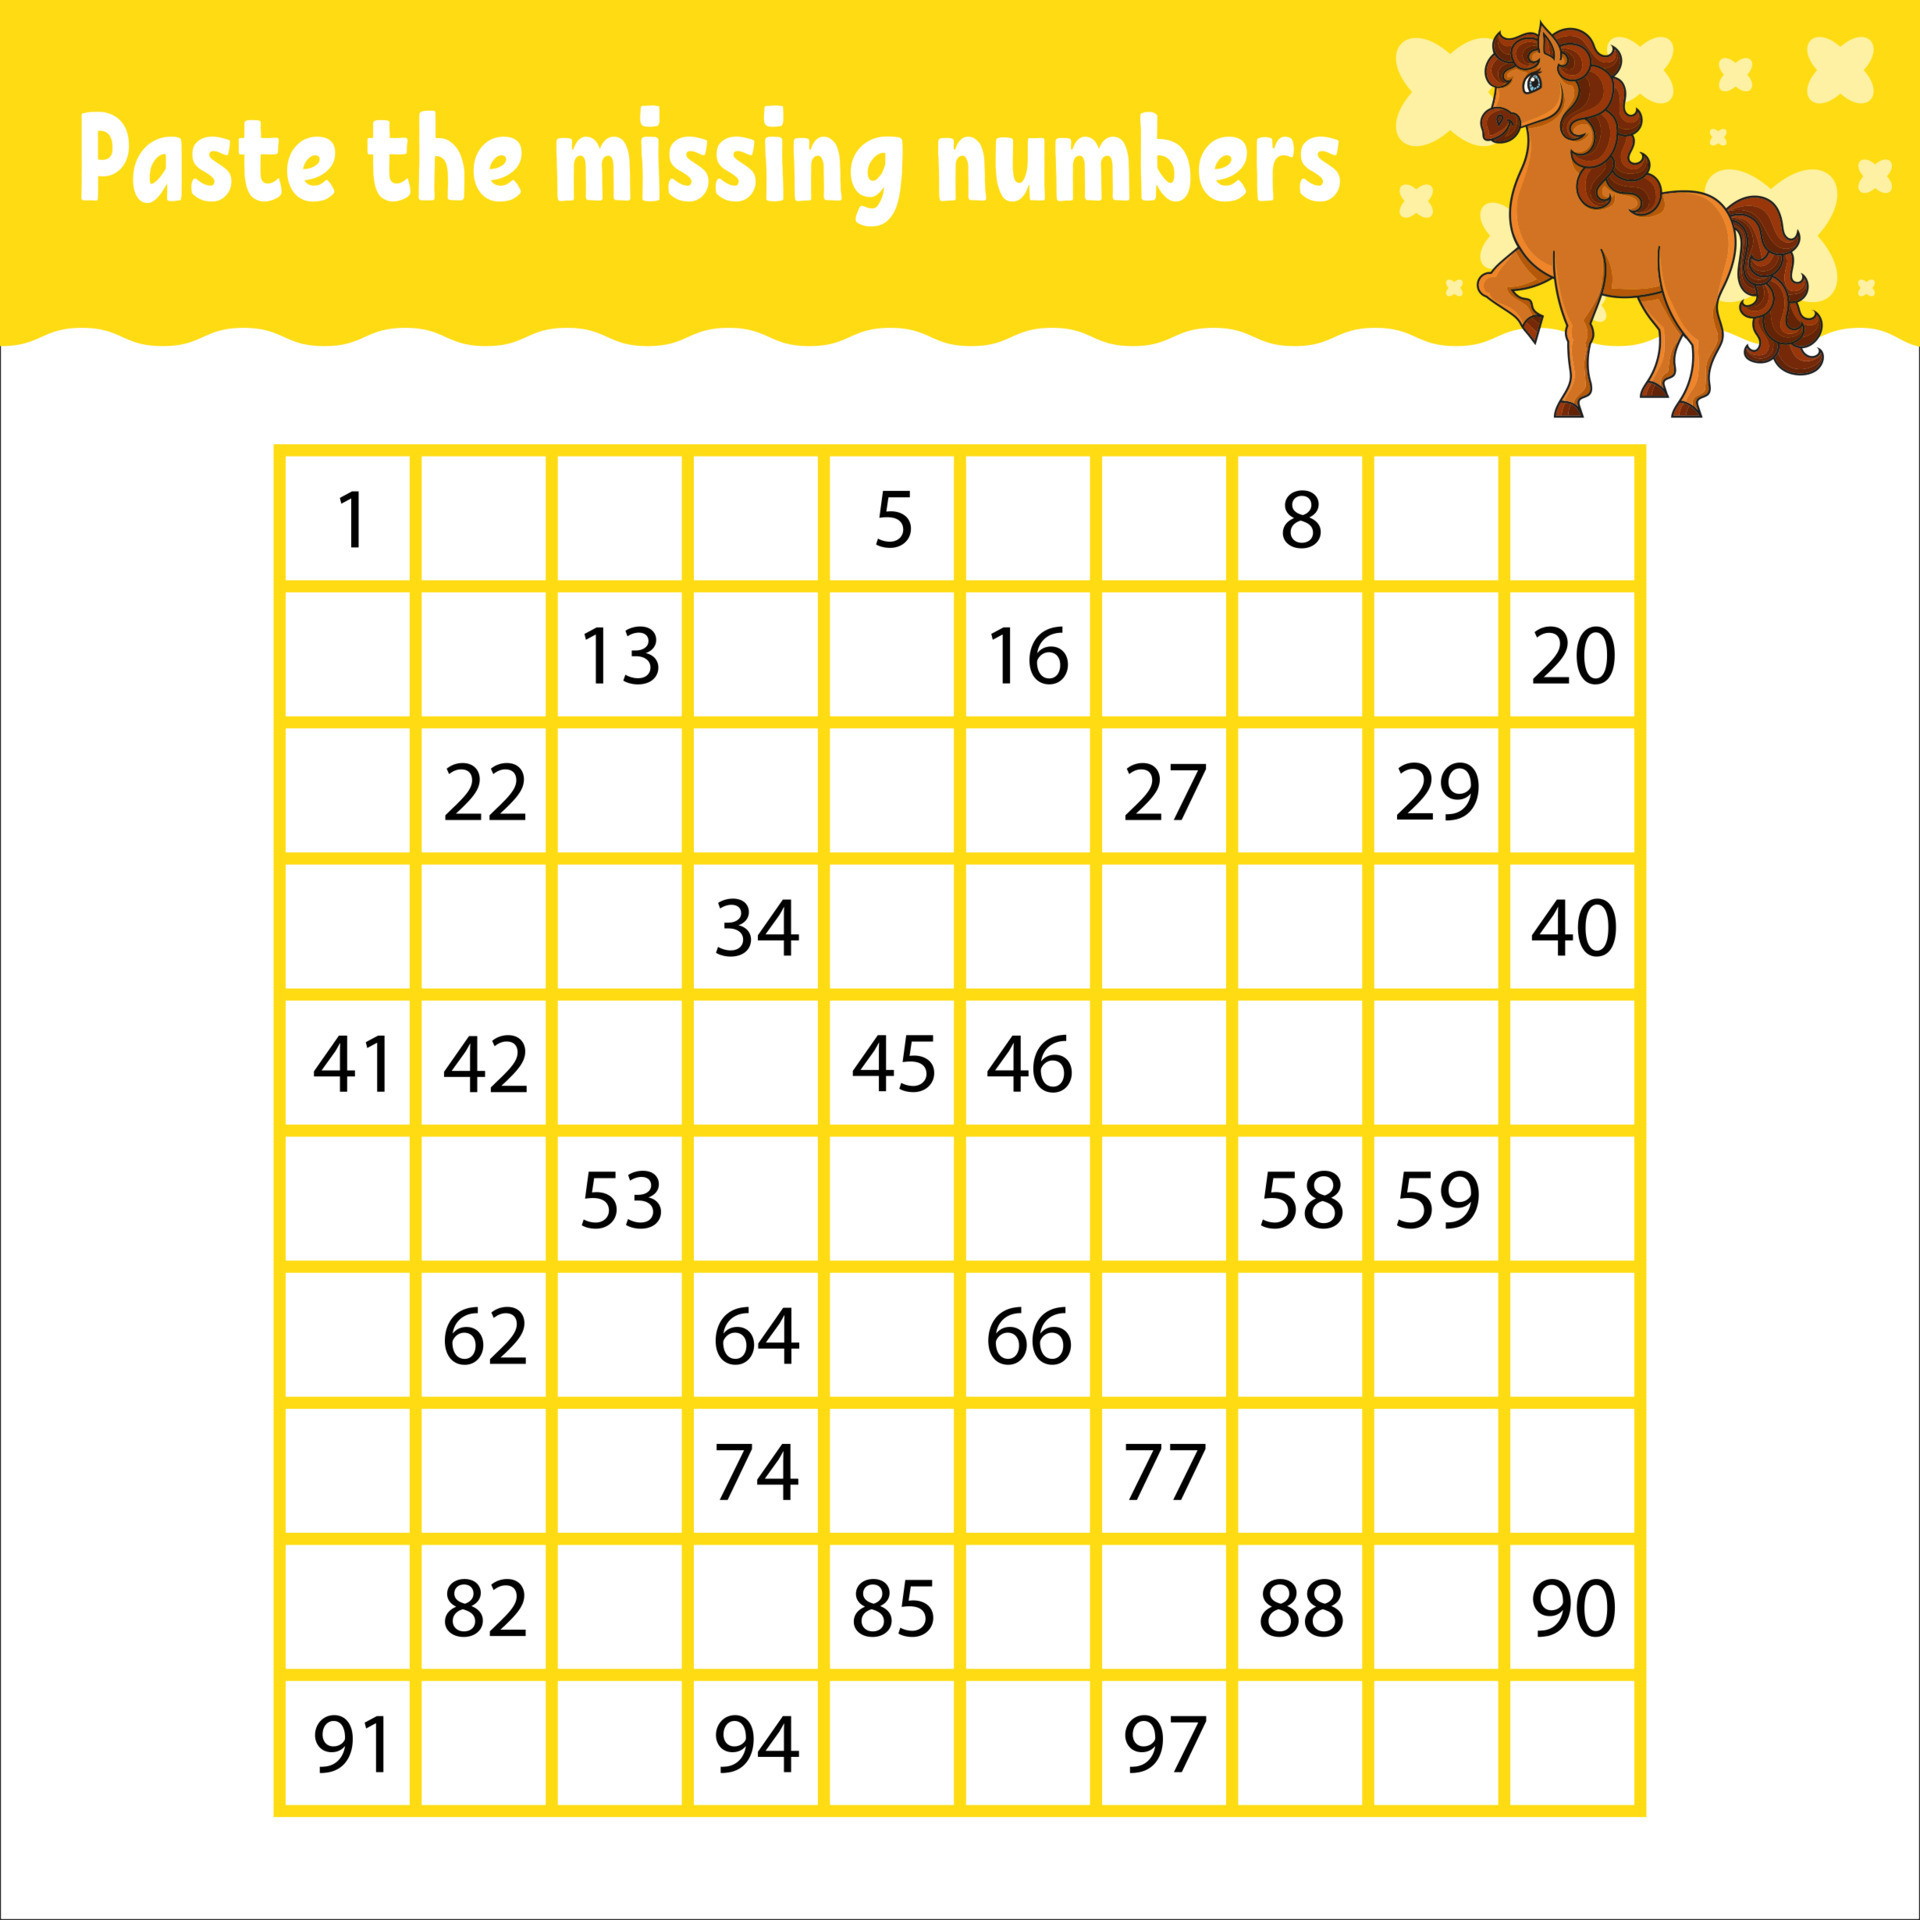 paste-the-missing-numbers-from-1-to-100-handwriting-practice-learning-numbers-for-kids